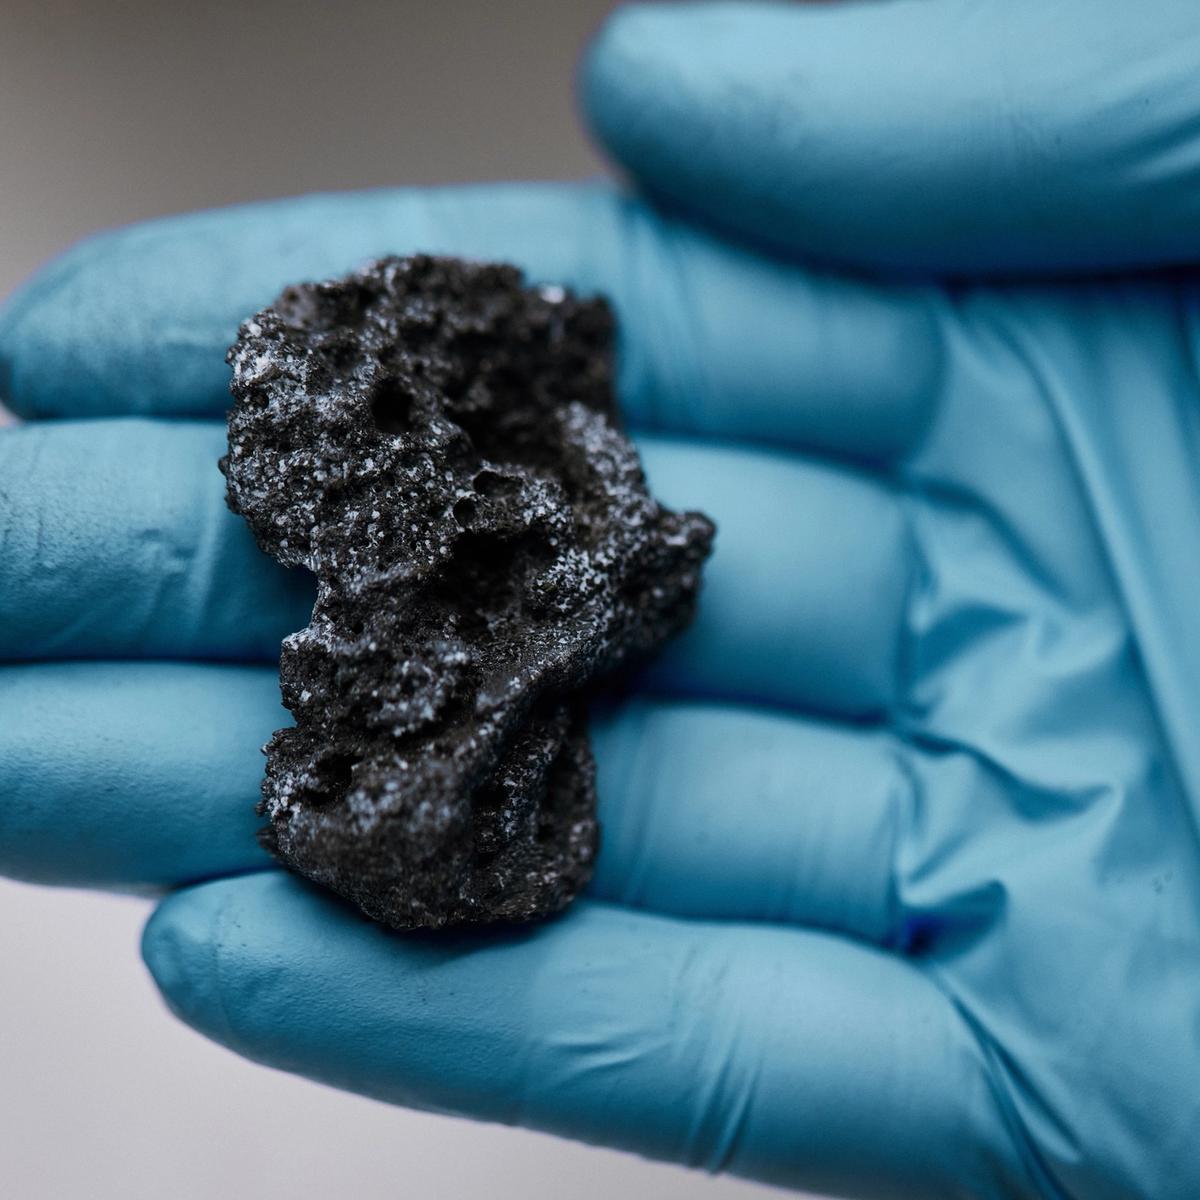 Lab worker holding lump of solid carbon